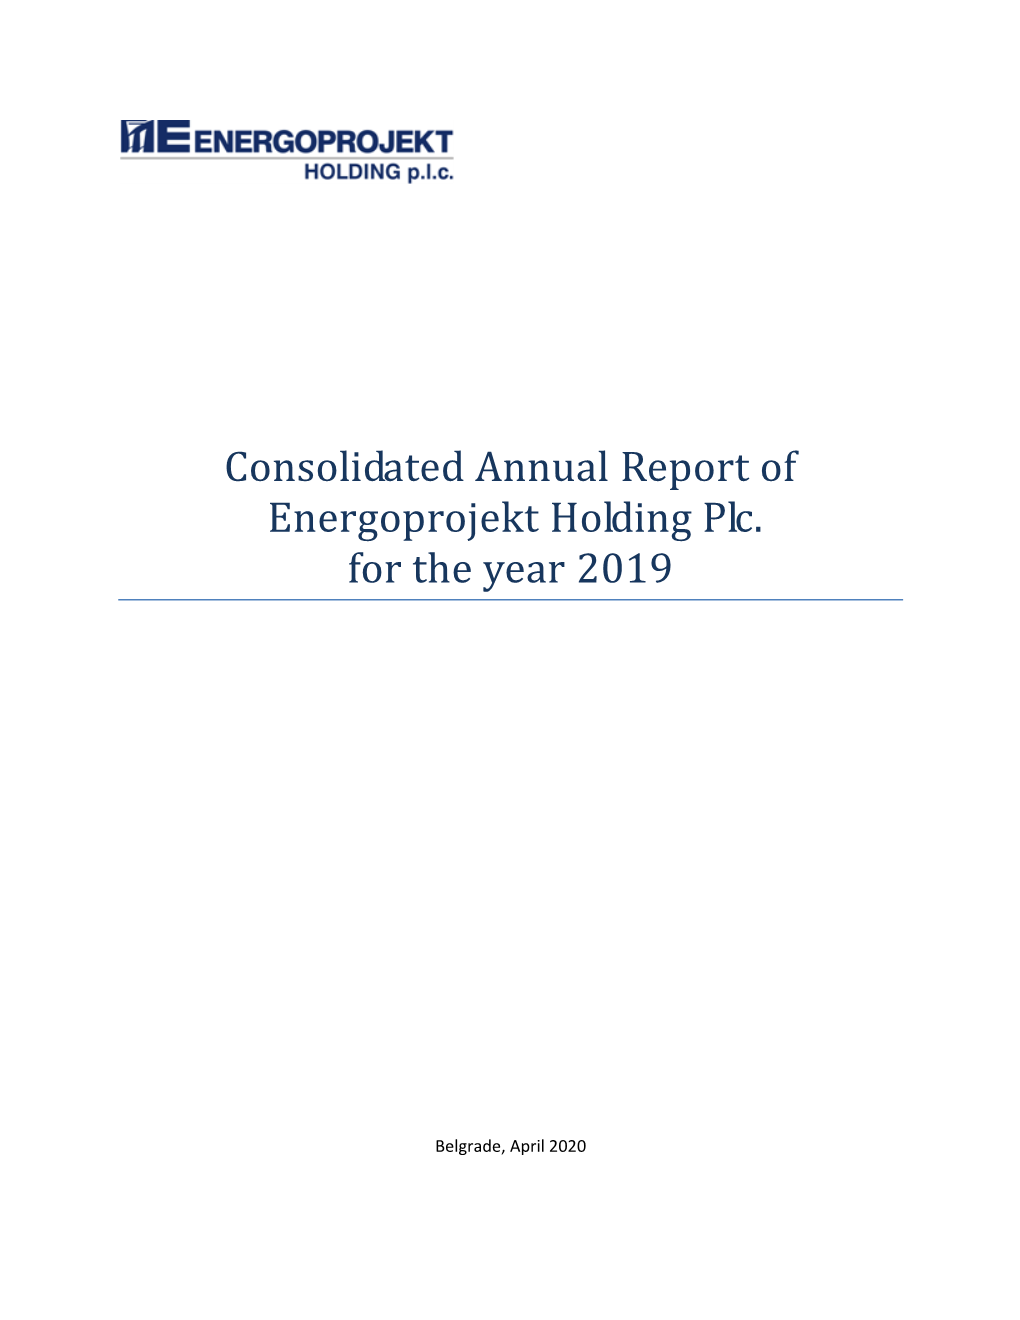 Consolidated Annual Report of Energoprojekt Holding Plc. for the Year 2019